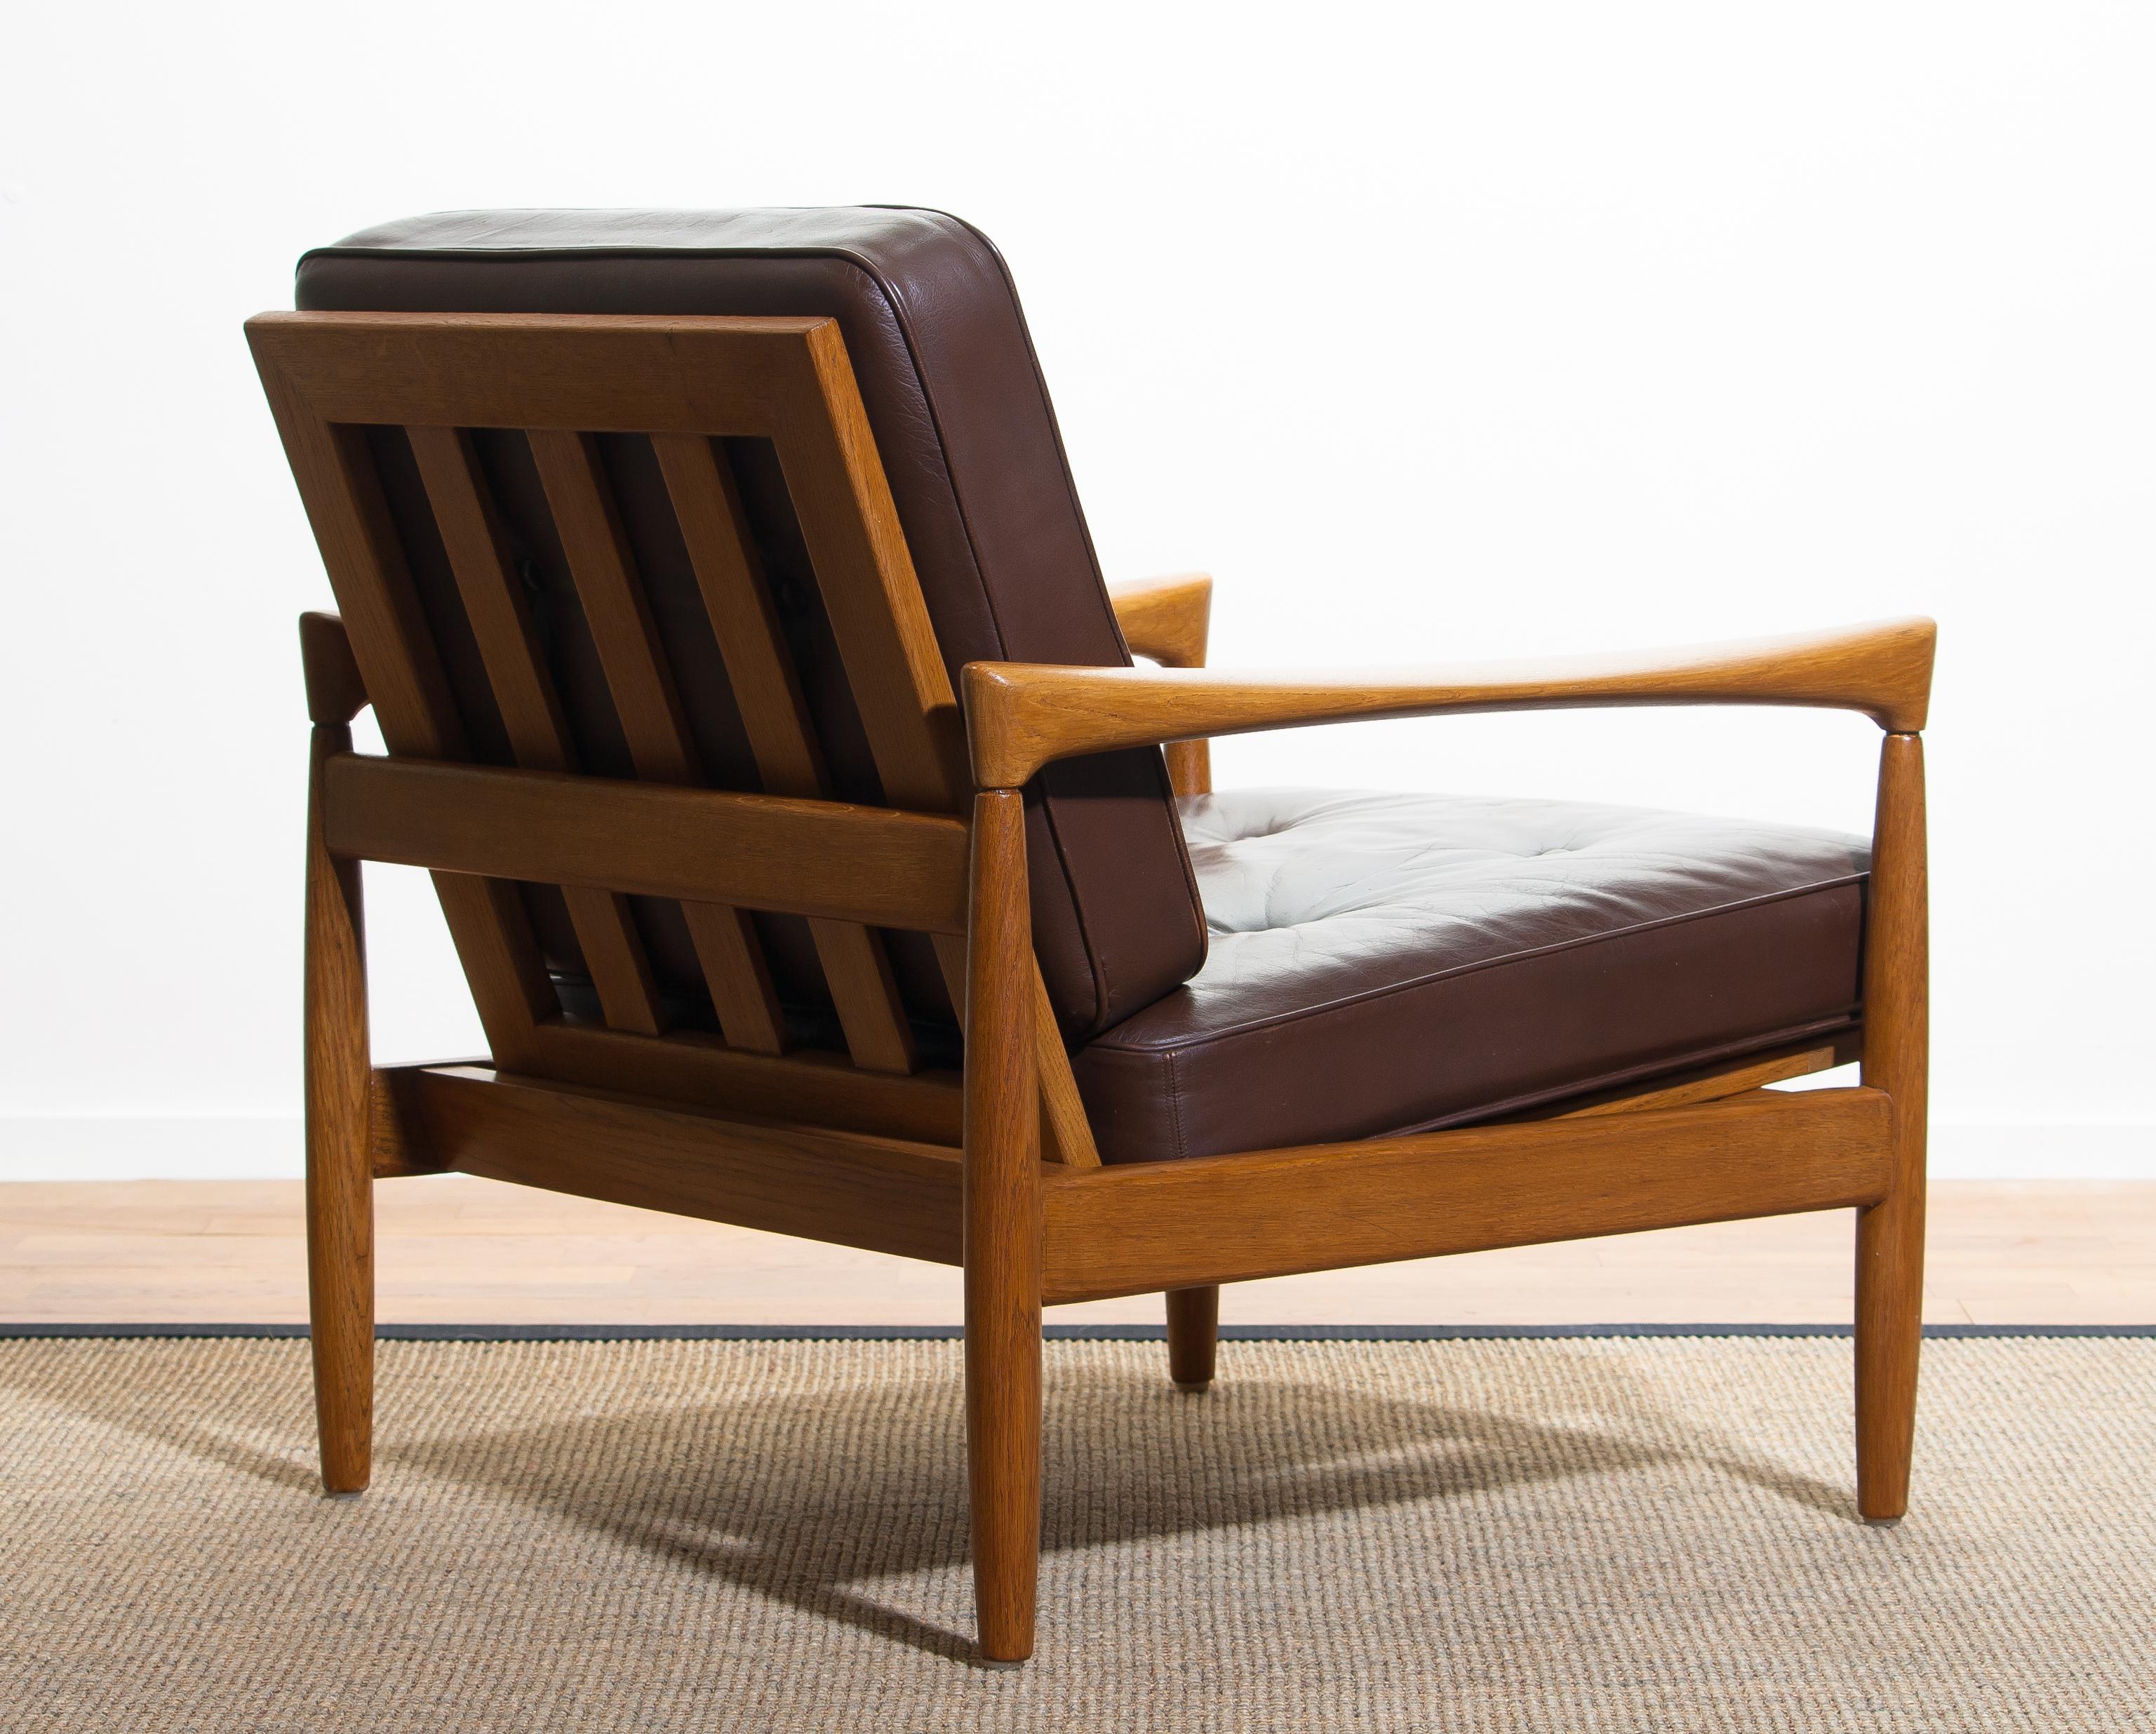 Mid-20th Century 1960s, Oak and Brown Leather Lounge Chair by Erik Wörtz for Bröderna Anderssons